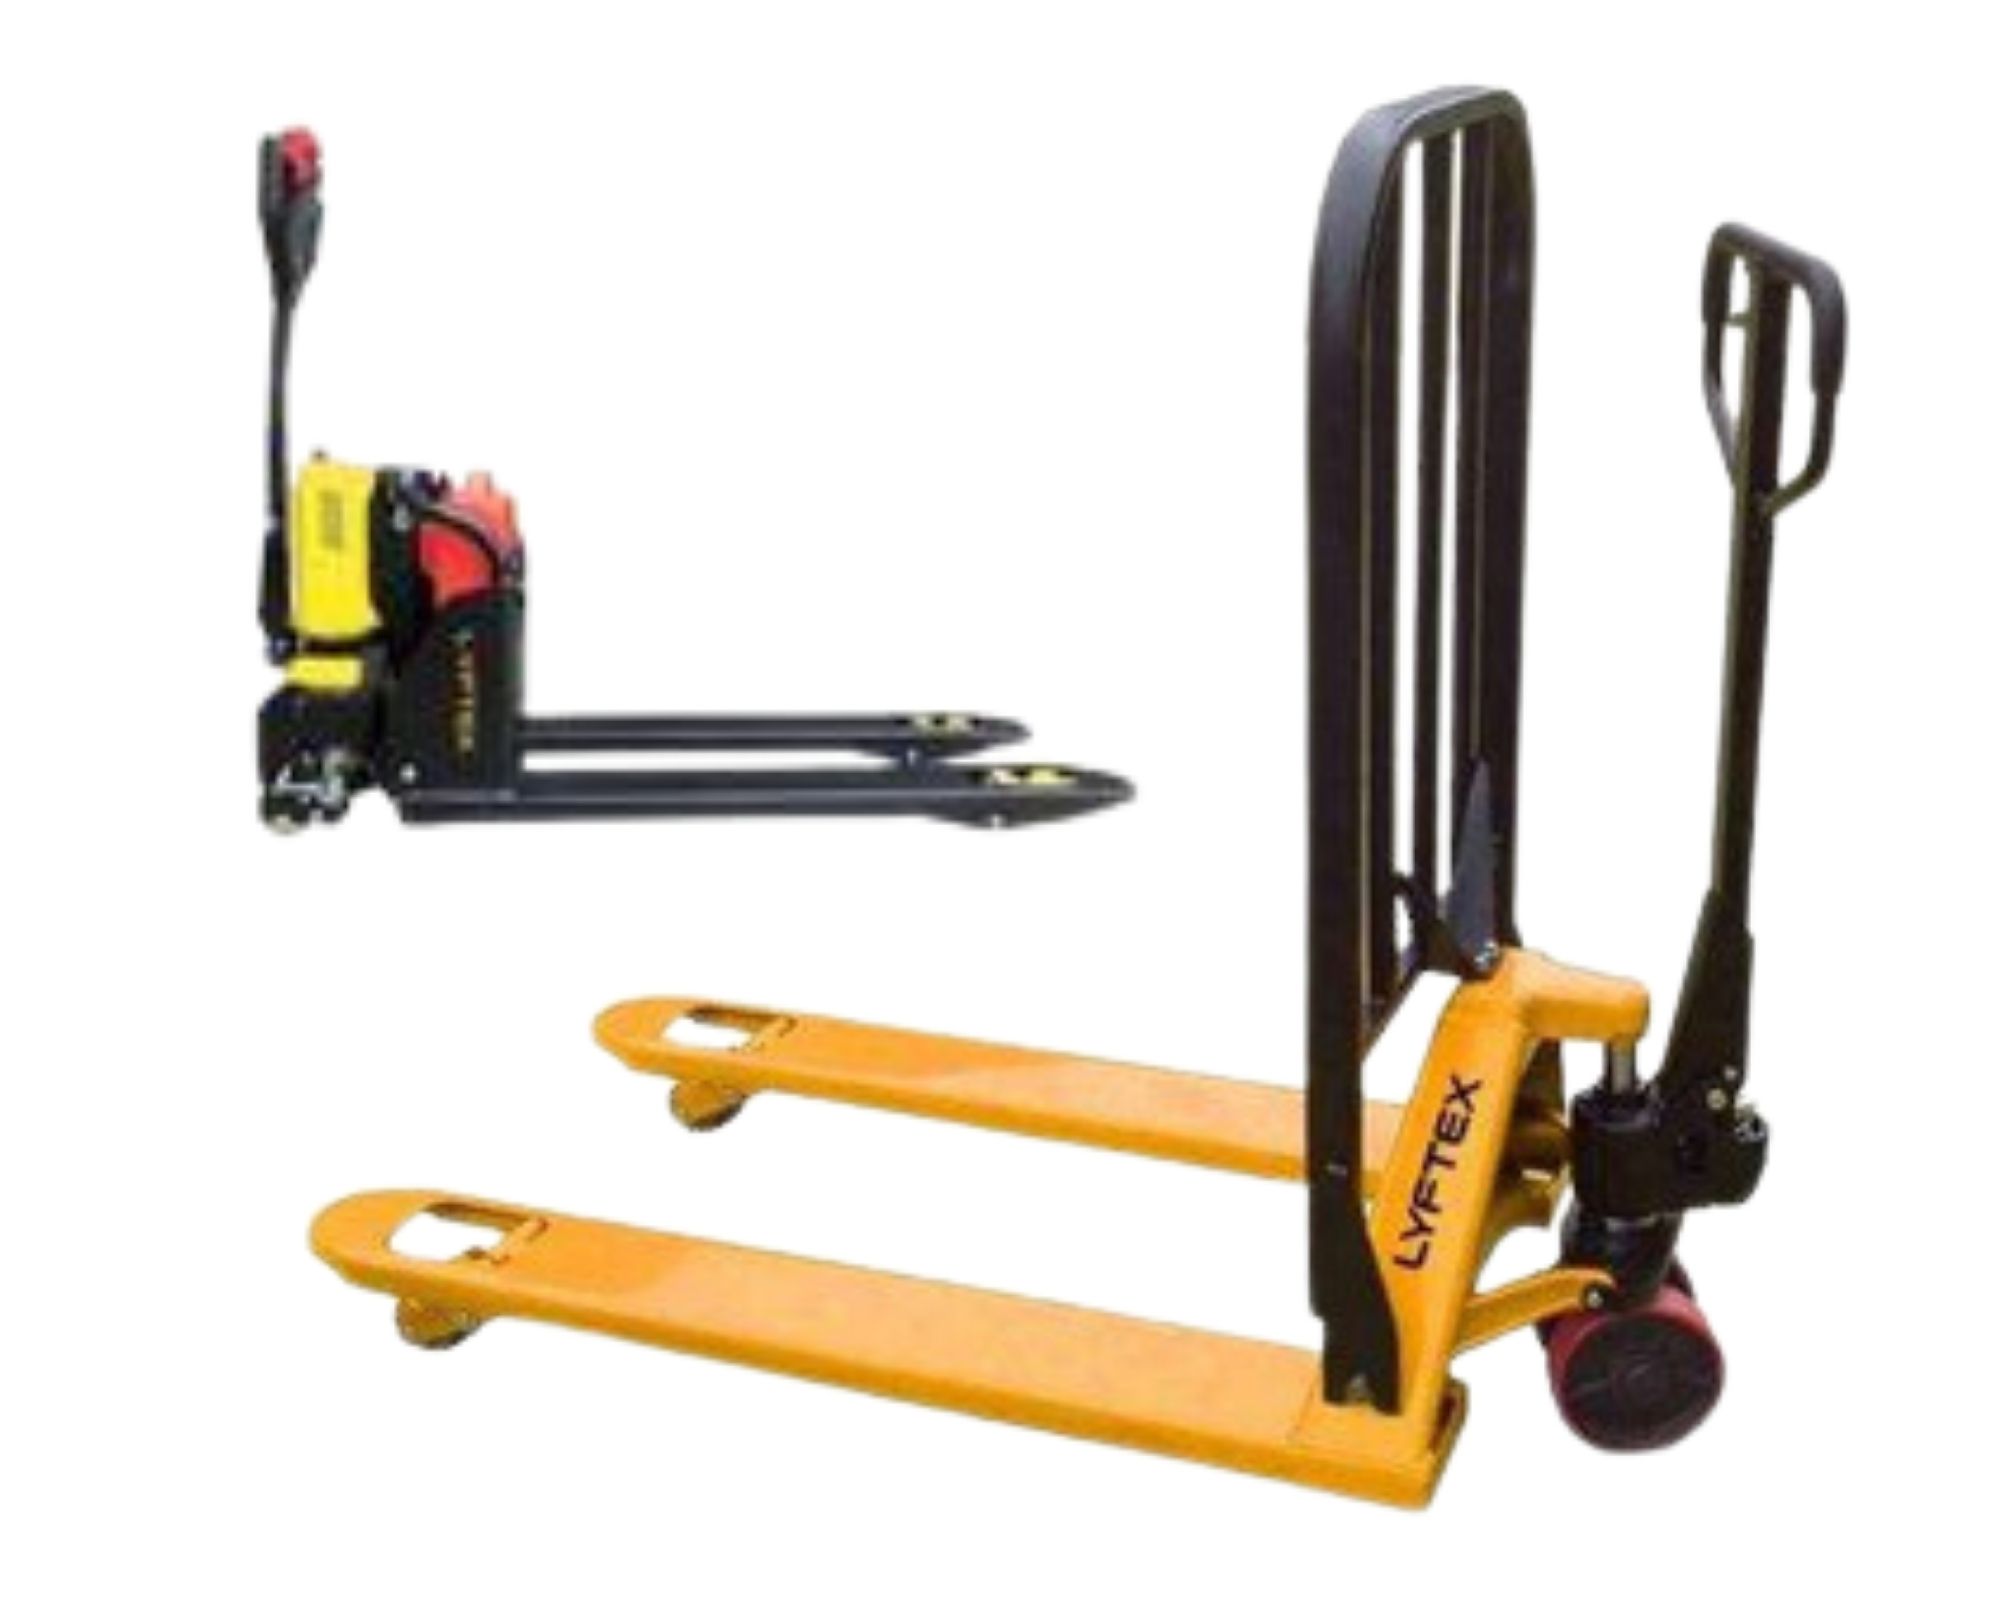 different types of pallet jacks for material handling operations